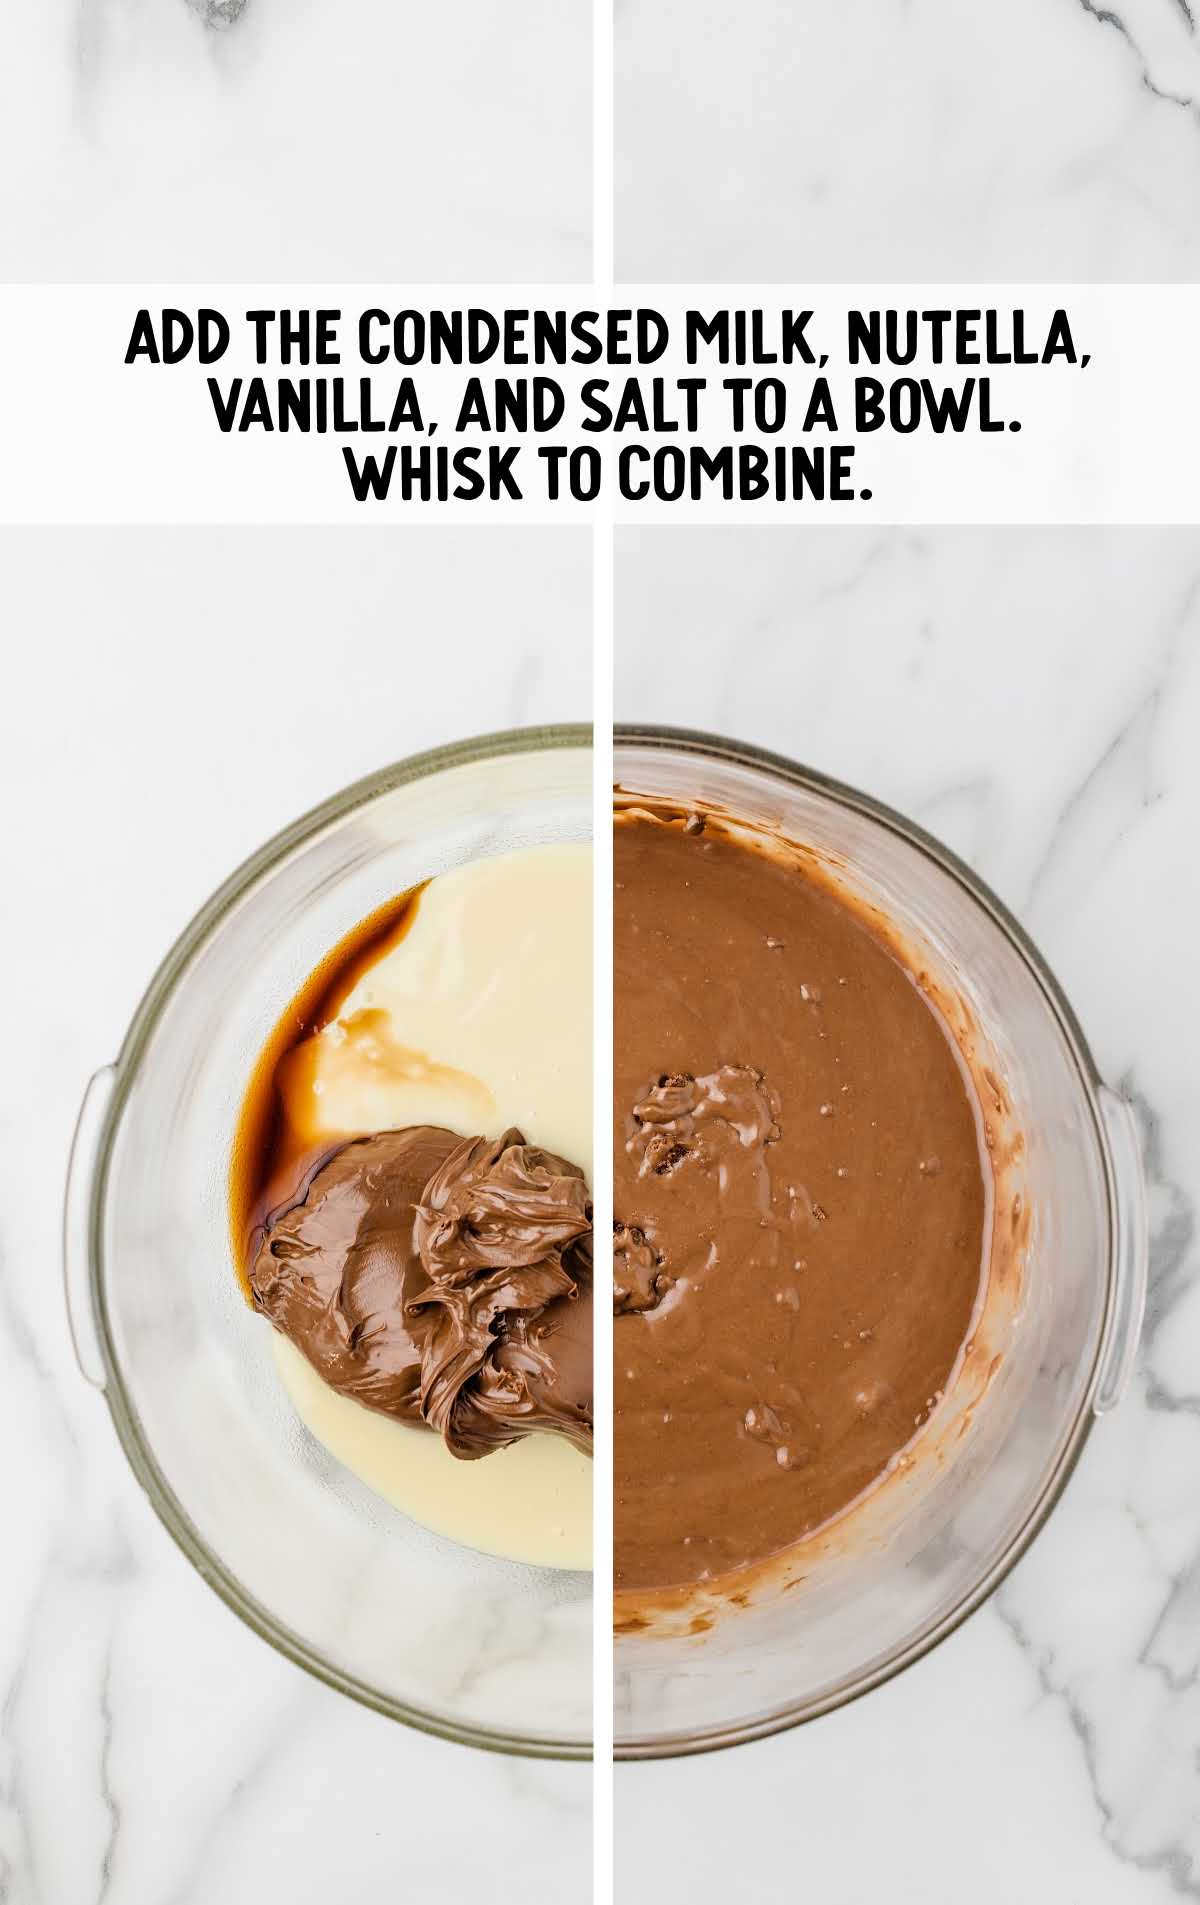 sweetened condensed milk, Nutella, vanilla extract, and salt combined in a bowl